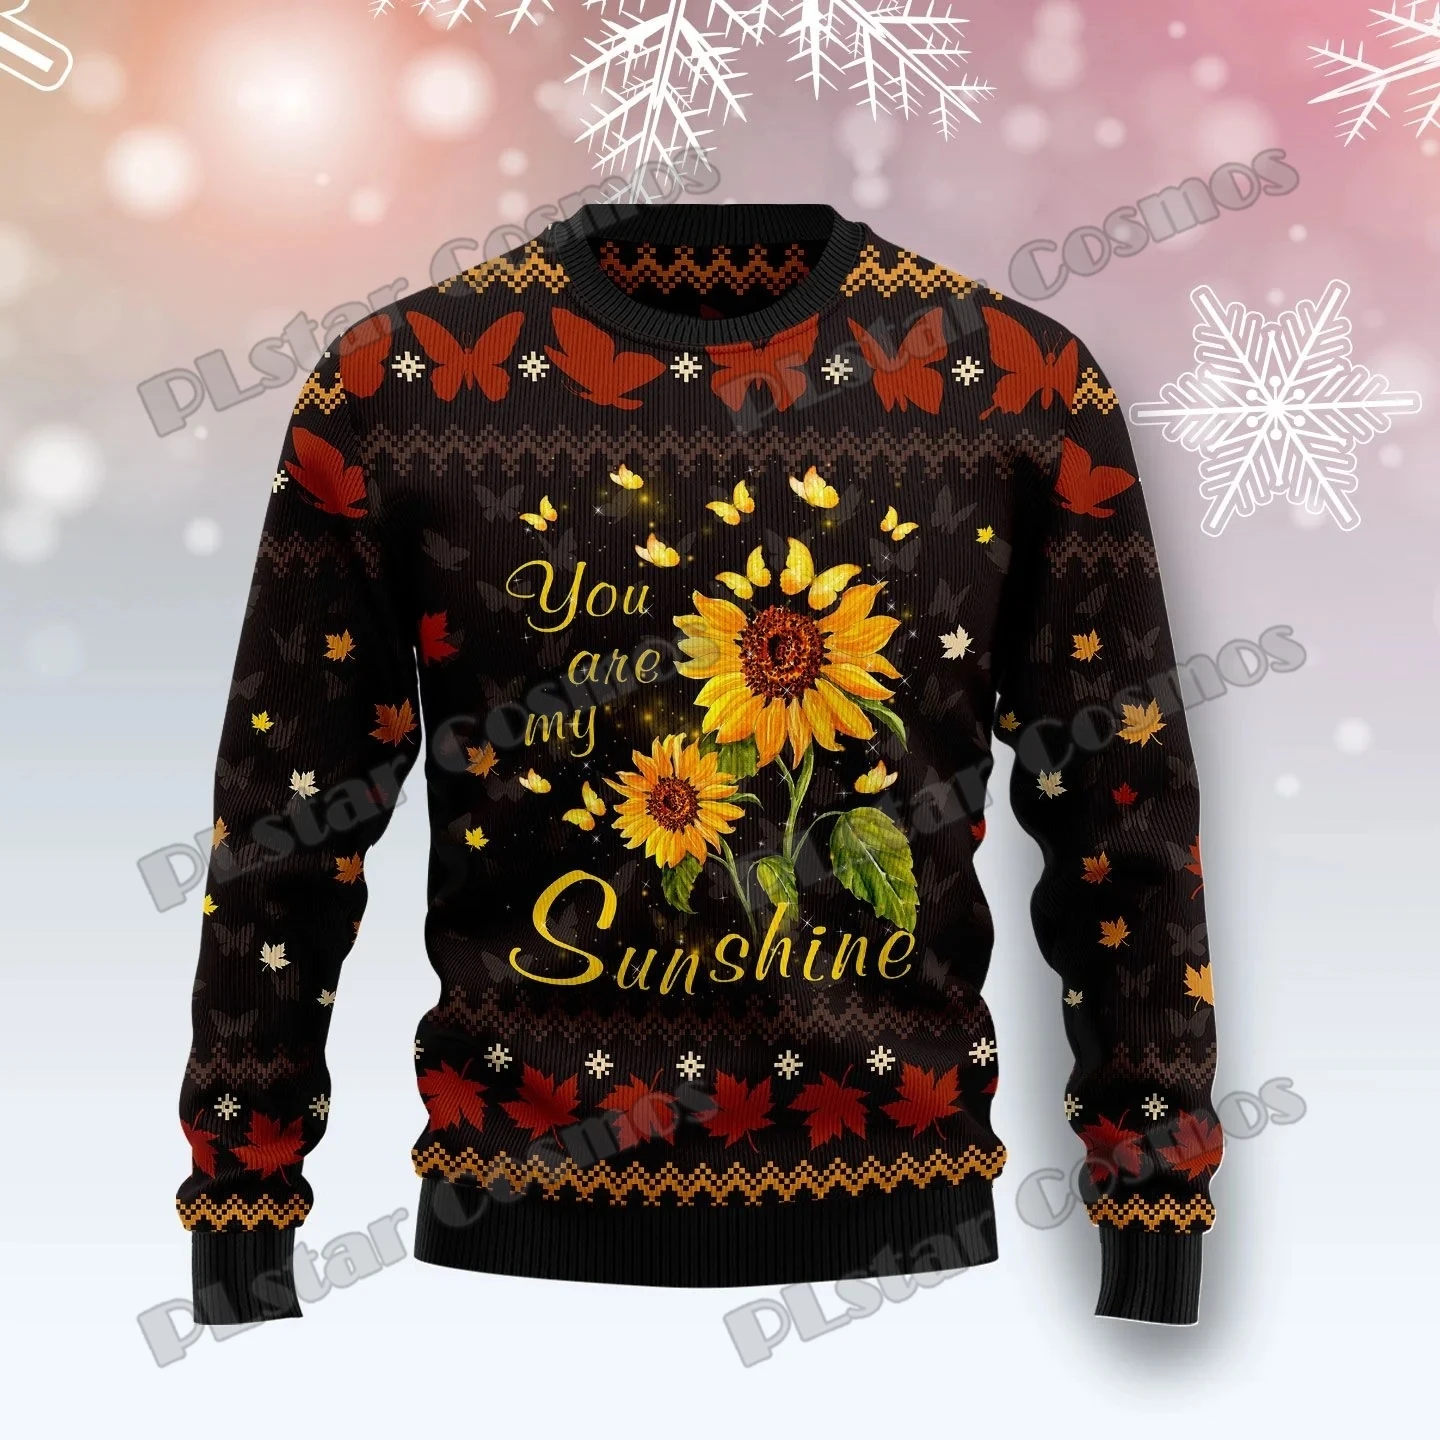 PLstar Cosmos Butterfly Sunshine 3D Printed Fashion Men's Ugly Christmas Sweater Winter Unisex Casual Knitwear Pullover MYY31 plstar cosmos bass fishing underwater camo 3d printed men women zipper hoodie unisex streetwear pullover casual outdoor style 4